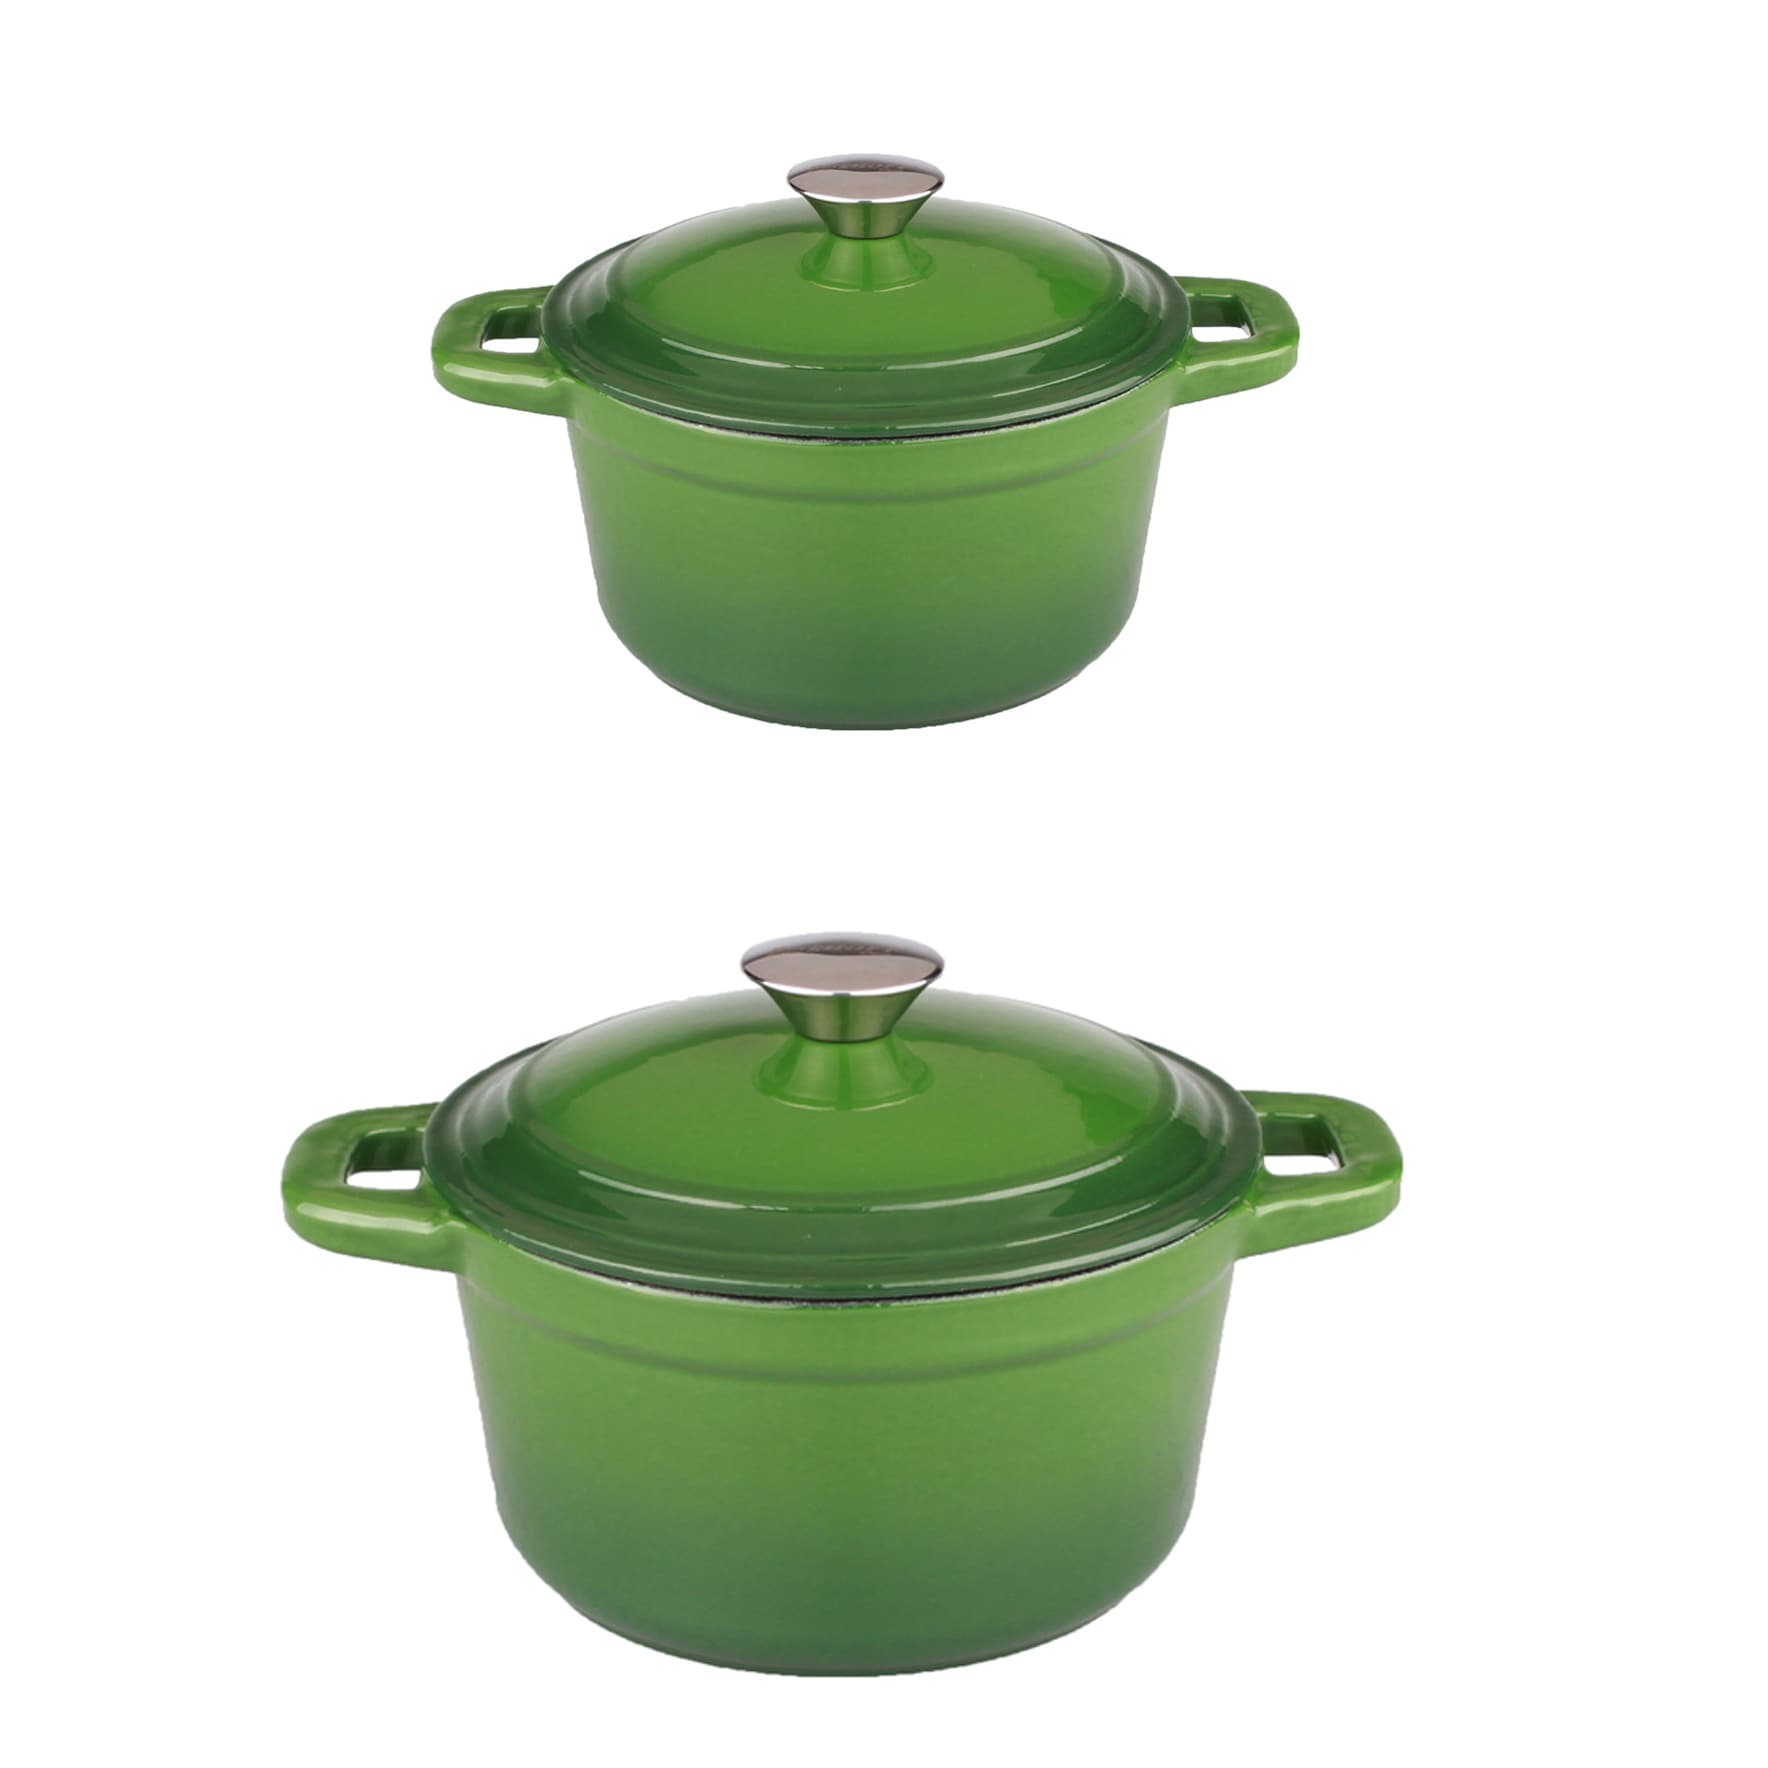 https://ak1.ostkcdn.com/images/products/is/images/direct/3c4774ef7d549f7e860b3311f5f9862194a15b80/Neo-4pc-Cast-Iron-Set-3qt-Covered-Dutch-Oven-%26-7qt-Covered-Stockpot-Green.jpg